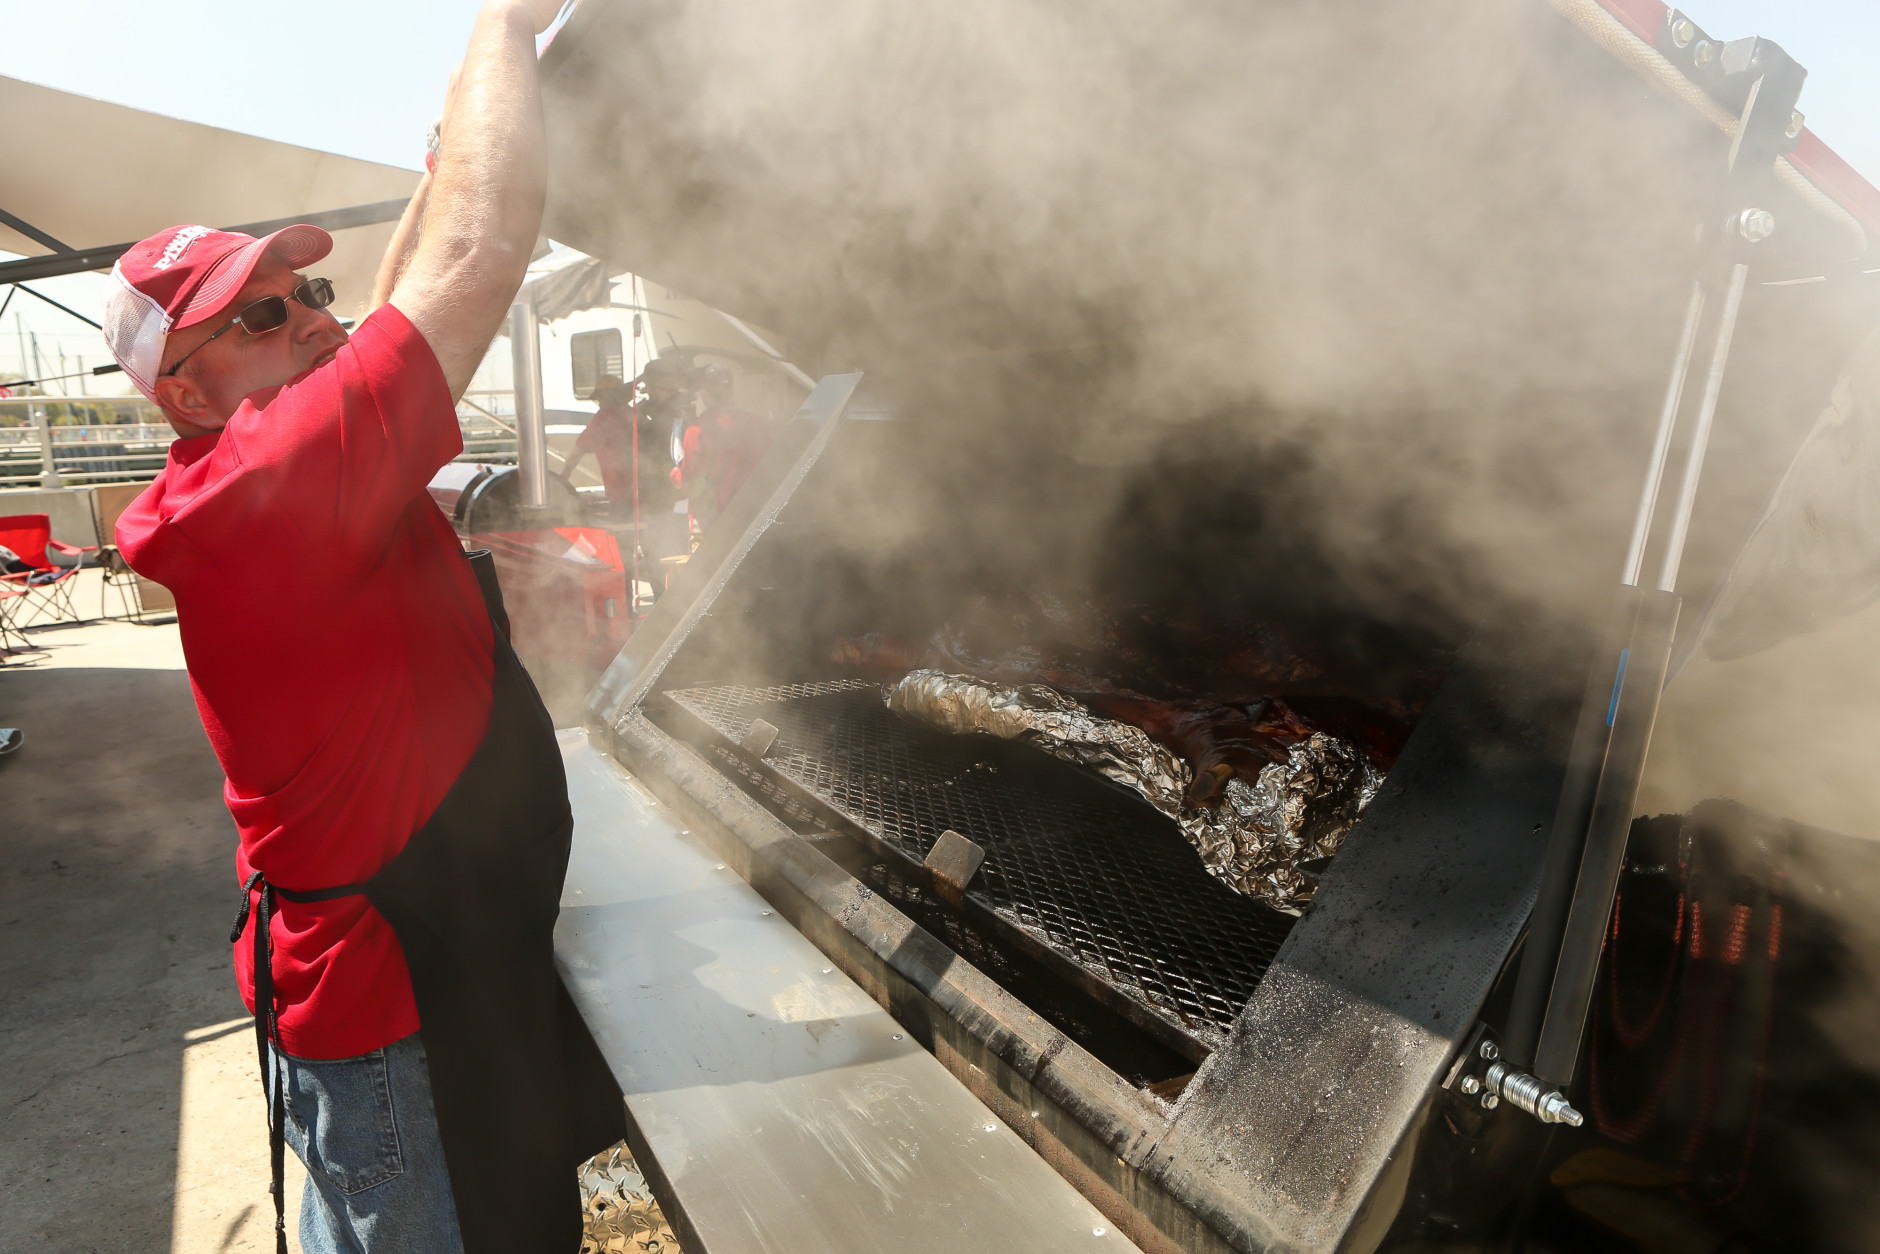 IMAGE DISTRIBUTED FOR KINGSFORD - Rescue Smokers team captain Robby Royal prepares his "Pick Your Pork" entry during the Kingsford Invitational on Saturday, May 2, 2015 at Hudson River Parks Pier 26, New York. (Photo by Matt Peyton/Invision for Kingsford/AP Images)